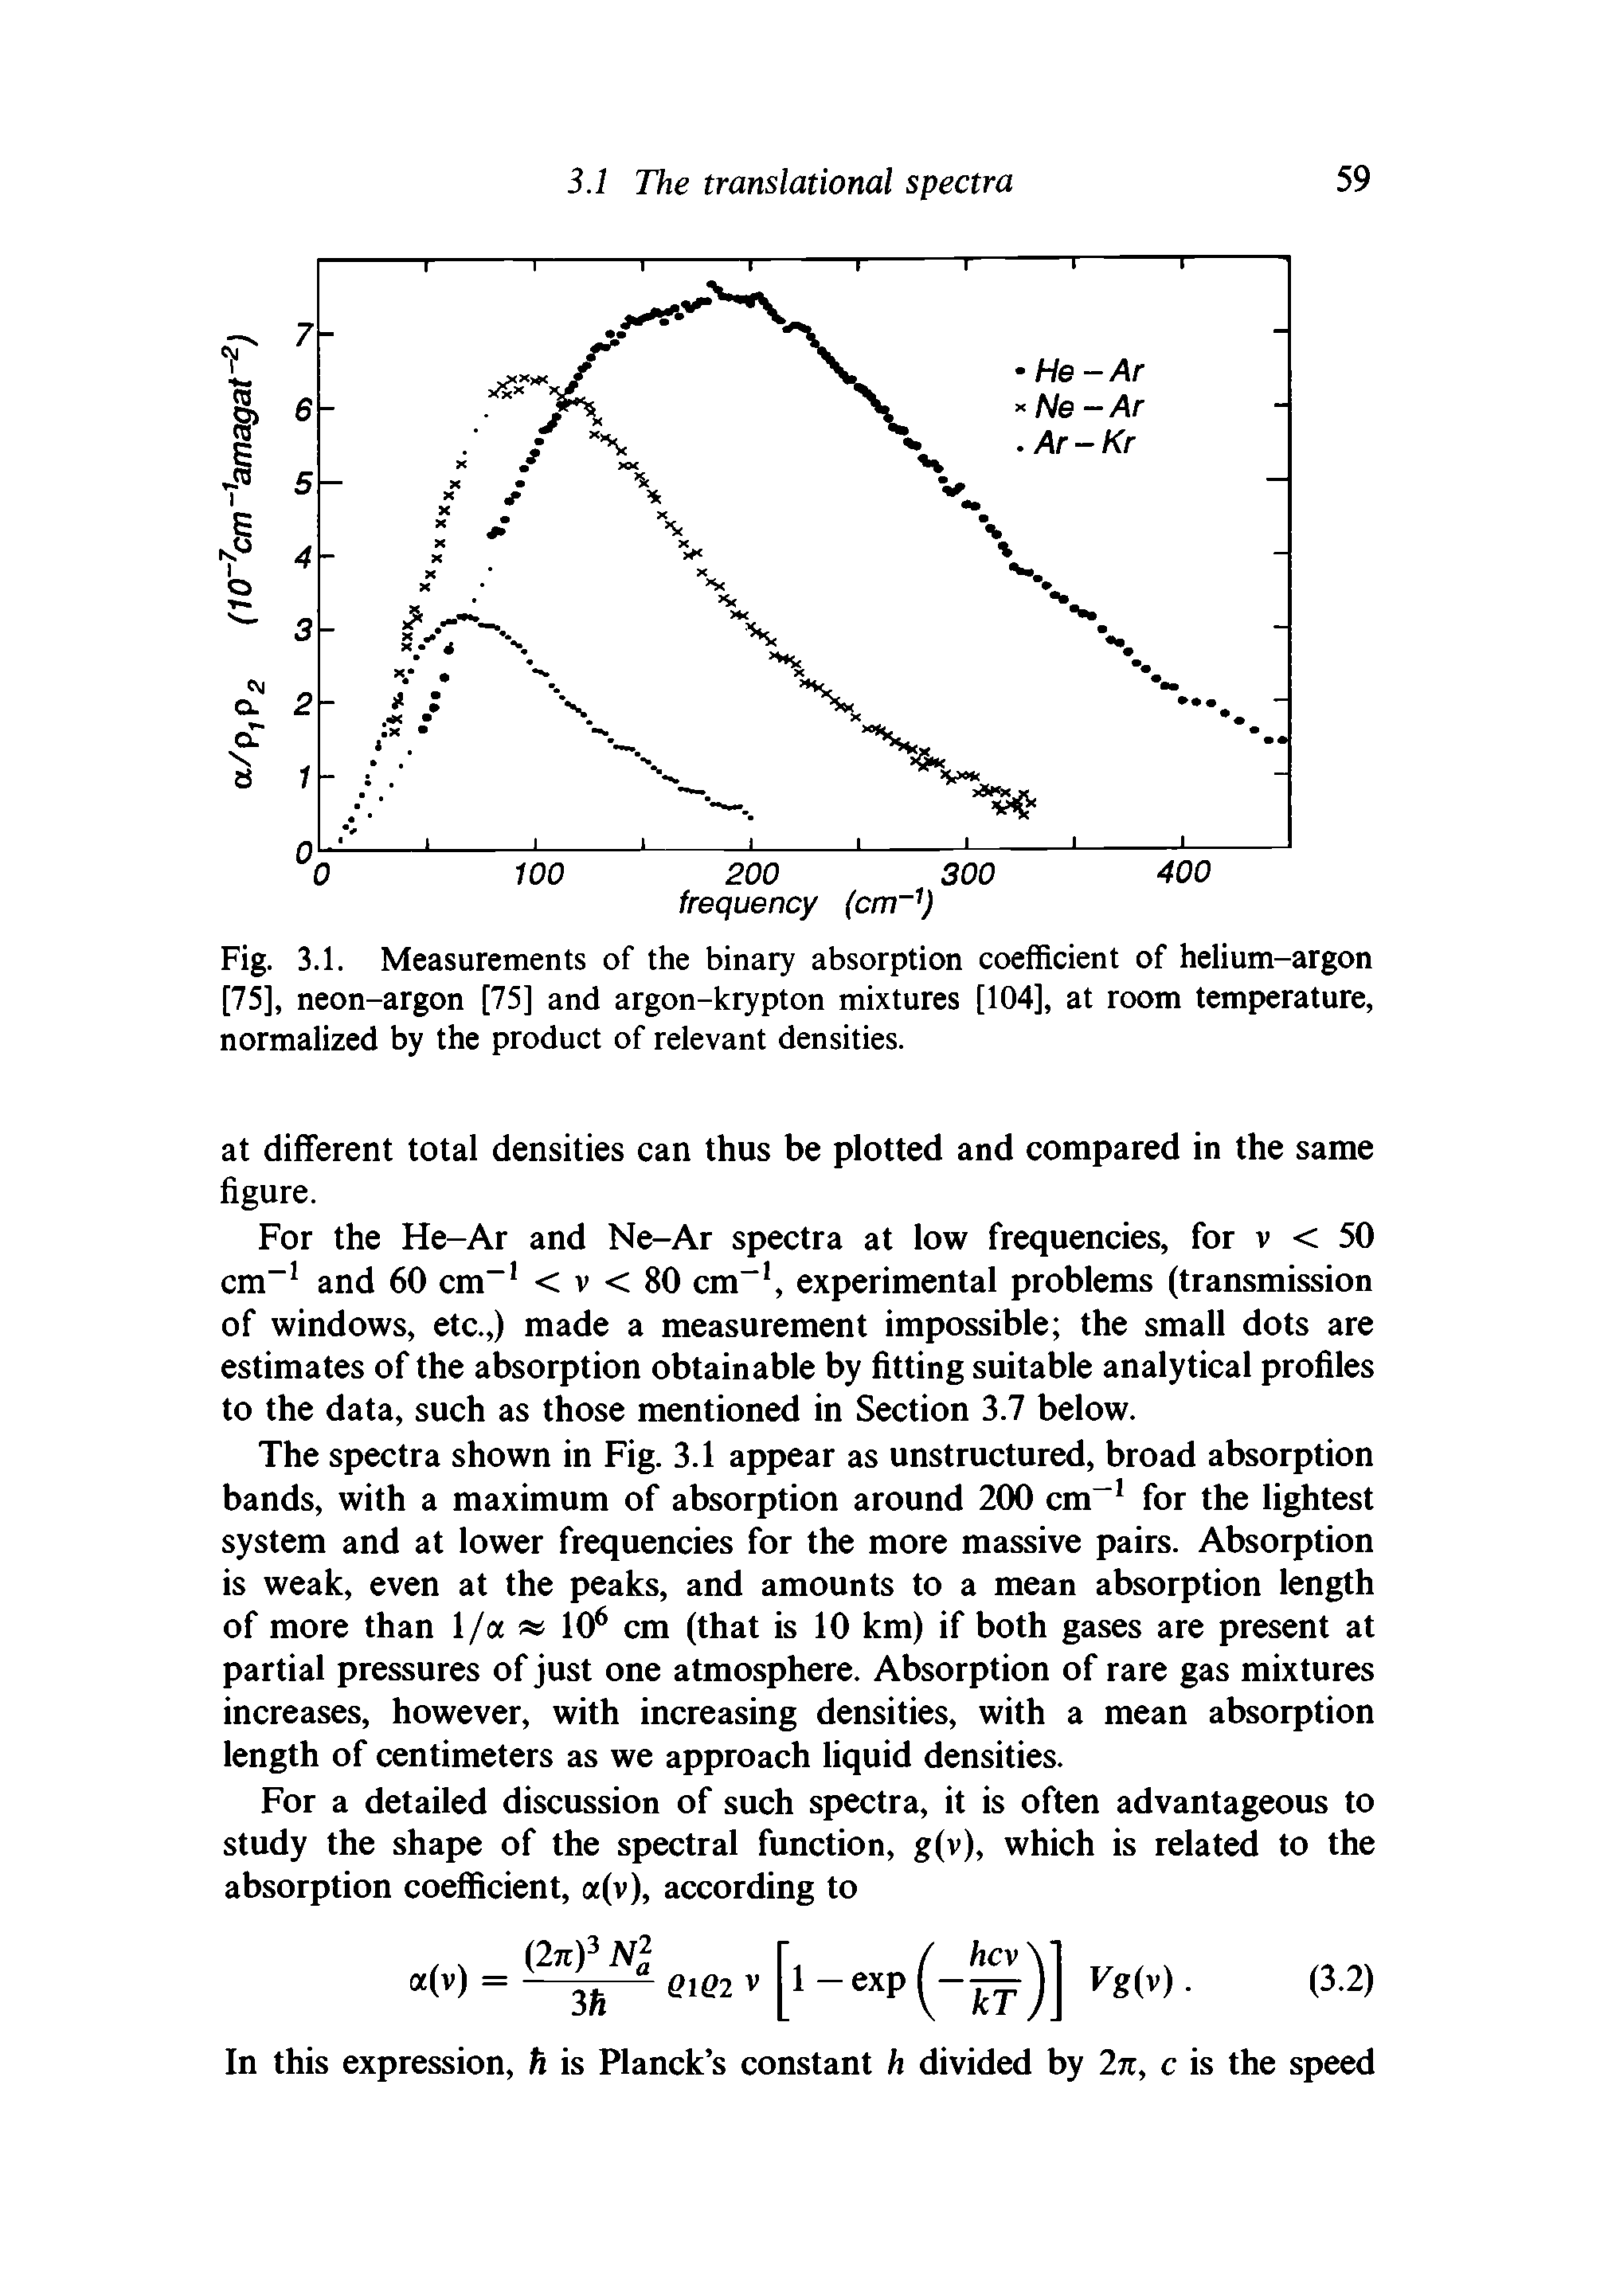 Fig. 3.1. Measurements of the binary absorption coefficient of helium-argon [75], neon-argon [75] and argon-krypton mixtures [104], at room temperature, normalized by the product of relevant densities.